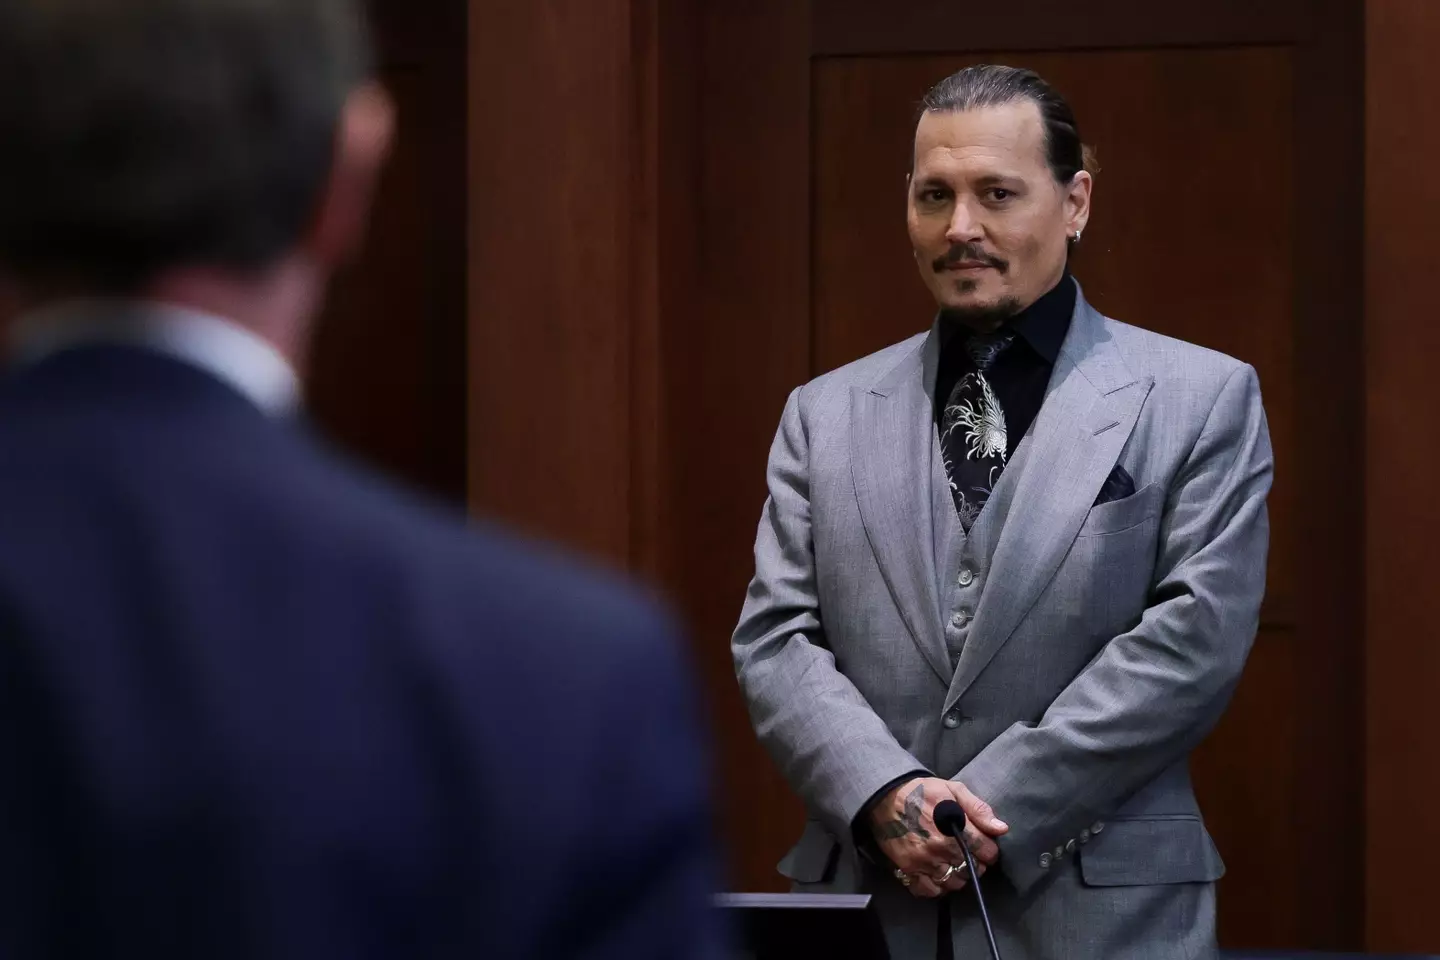 Depp testified about his relationship with Disney in court.